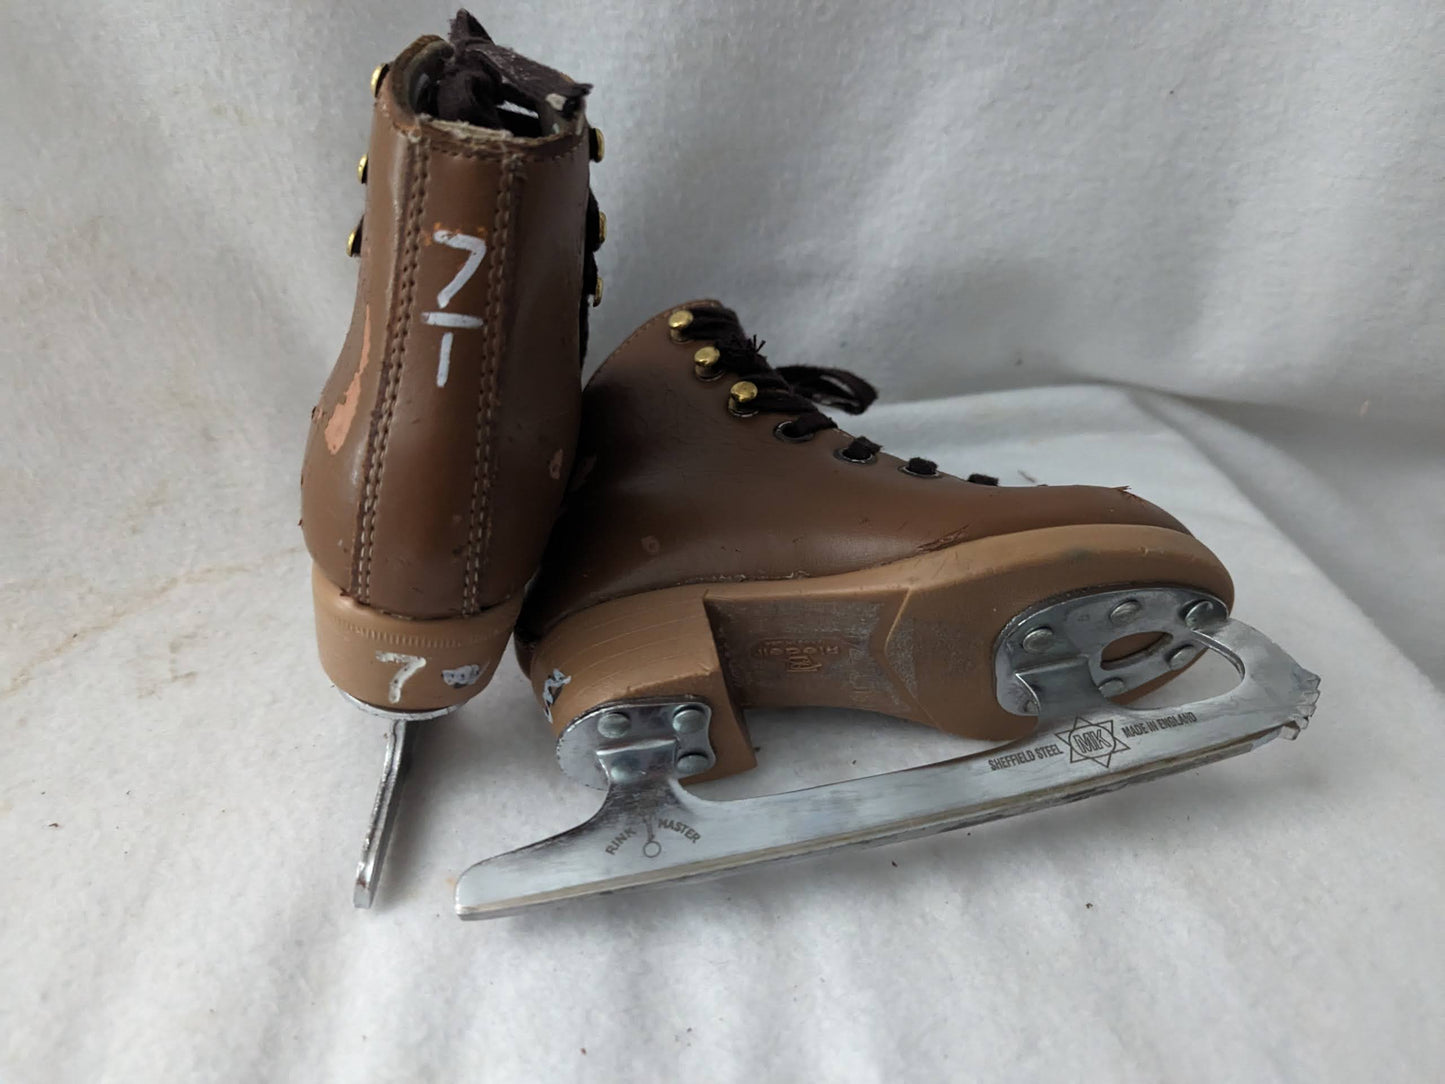 Rink Master Ice Skates Size Youth 7 Color Brown Condition Used